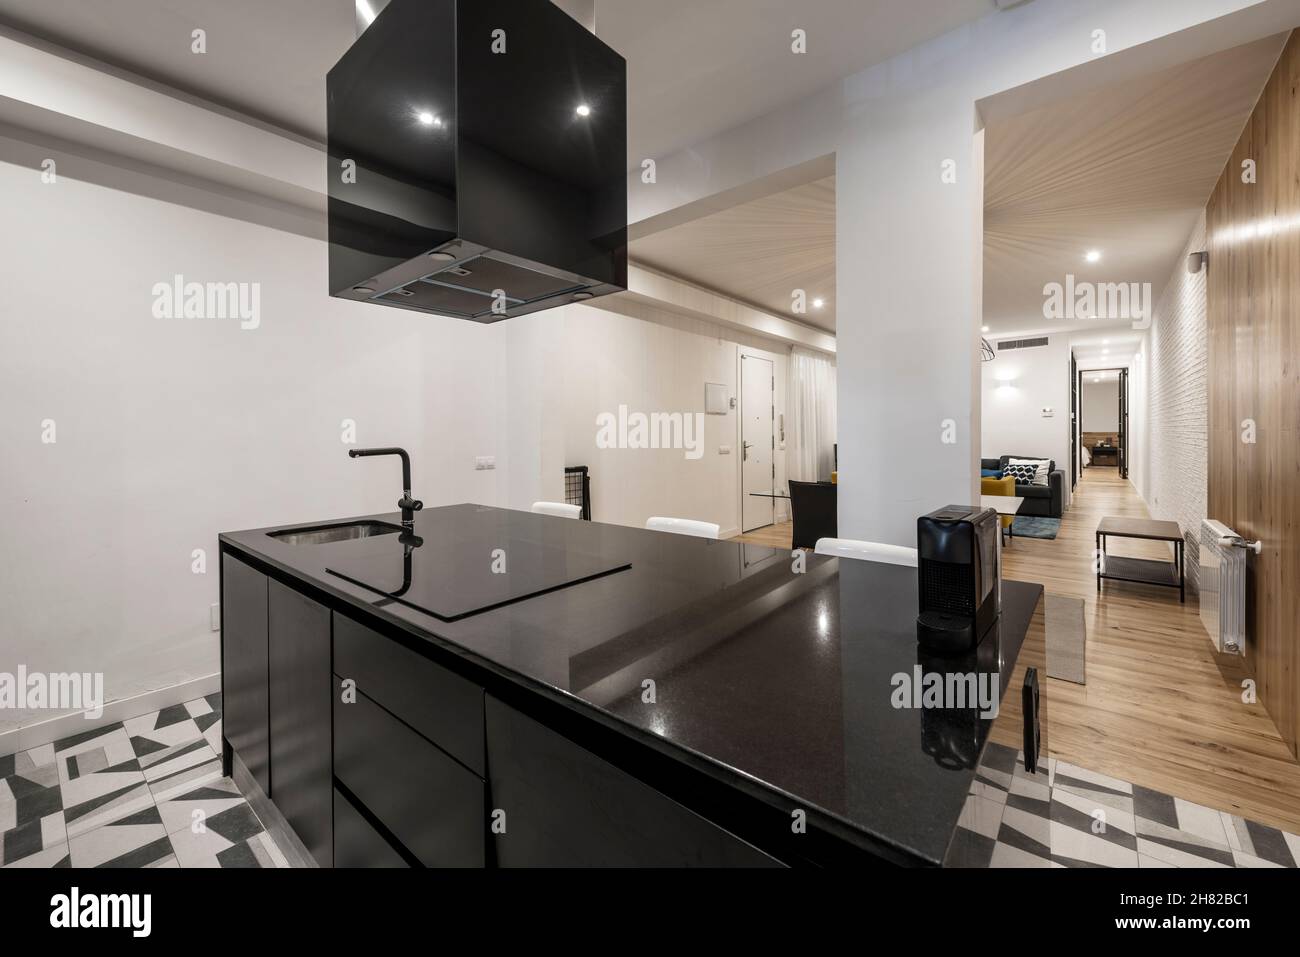 Black marble kitchen island with hob and hood in a vacation rental apartment Stock Photo